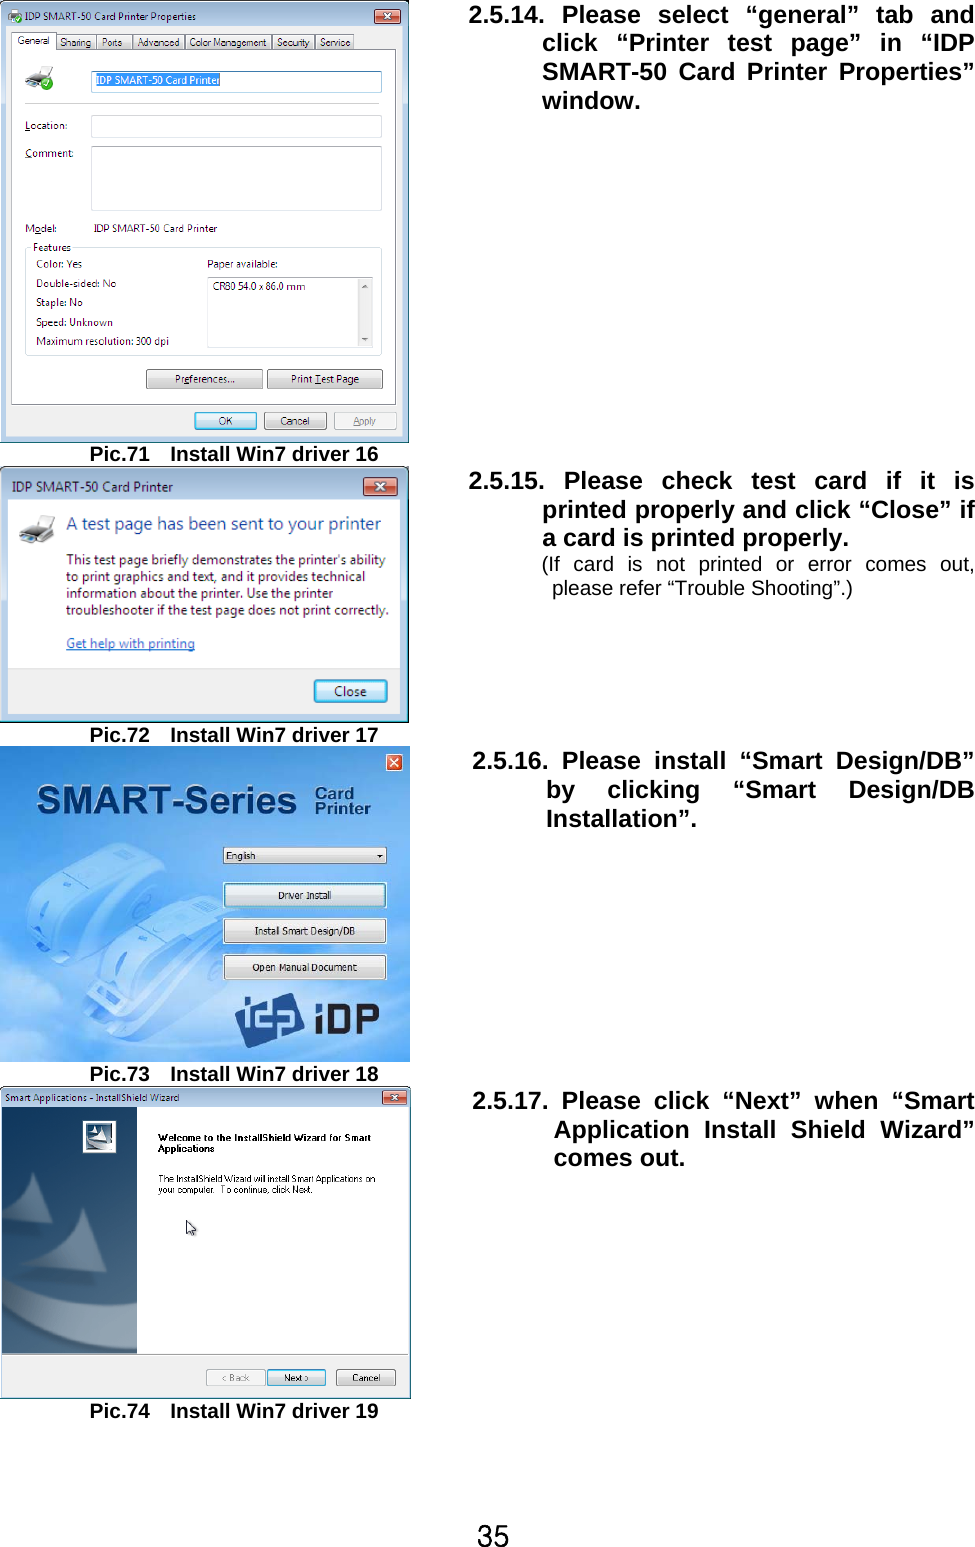 35  Pic.71    Install Win7 driver 16 2.5.14. Please select “general” tab and click “Printer test page” in “IDPSMART-50 Card Printer Properties”window.   Pic.72    Install Win7 driver 17 2.5.15. Please check test card if it is printed properly and click “Close” if a card is printed properly.   (If card is not printed or error comes out, please refer “Trouble Shooting”.)   Pic.73    Install Win7 driver 18 2.5.16. Please install “Smart Design/DB”by clicking “Smart Design/DB Installation”.    Pic.74    Install Win7 driver 19 2.5.17. Please click “Next” when “Smart Application Install Shield Wizard”comes out.    